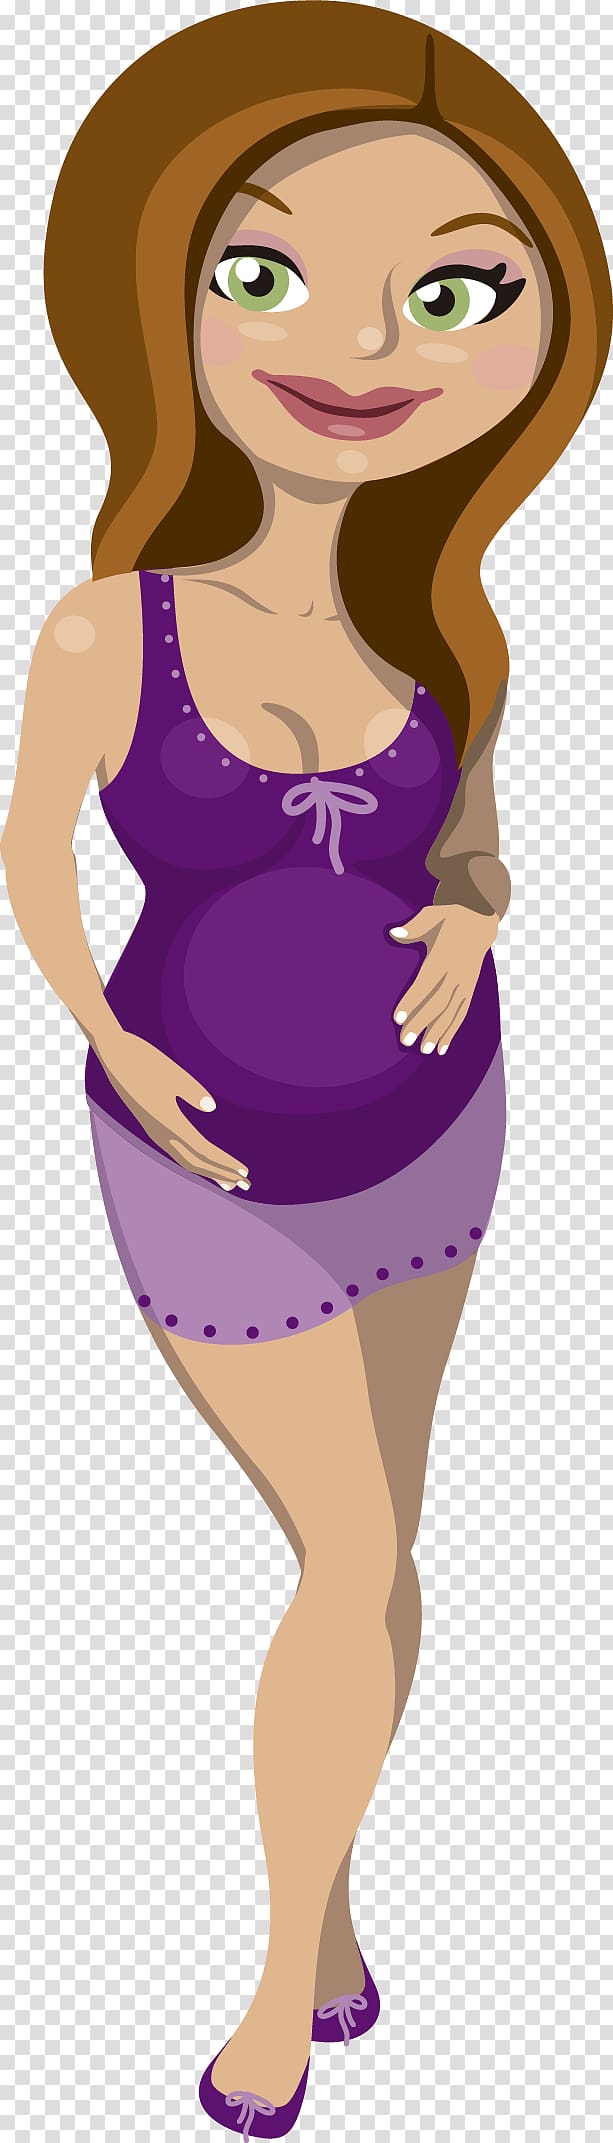 Pregnancy Urine Proteinuria Urinary tract infection Uric acid, painted pregnant women transparent background PNG clipart